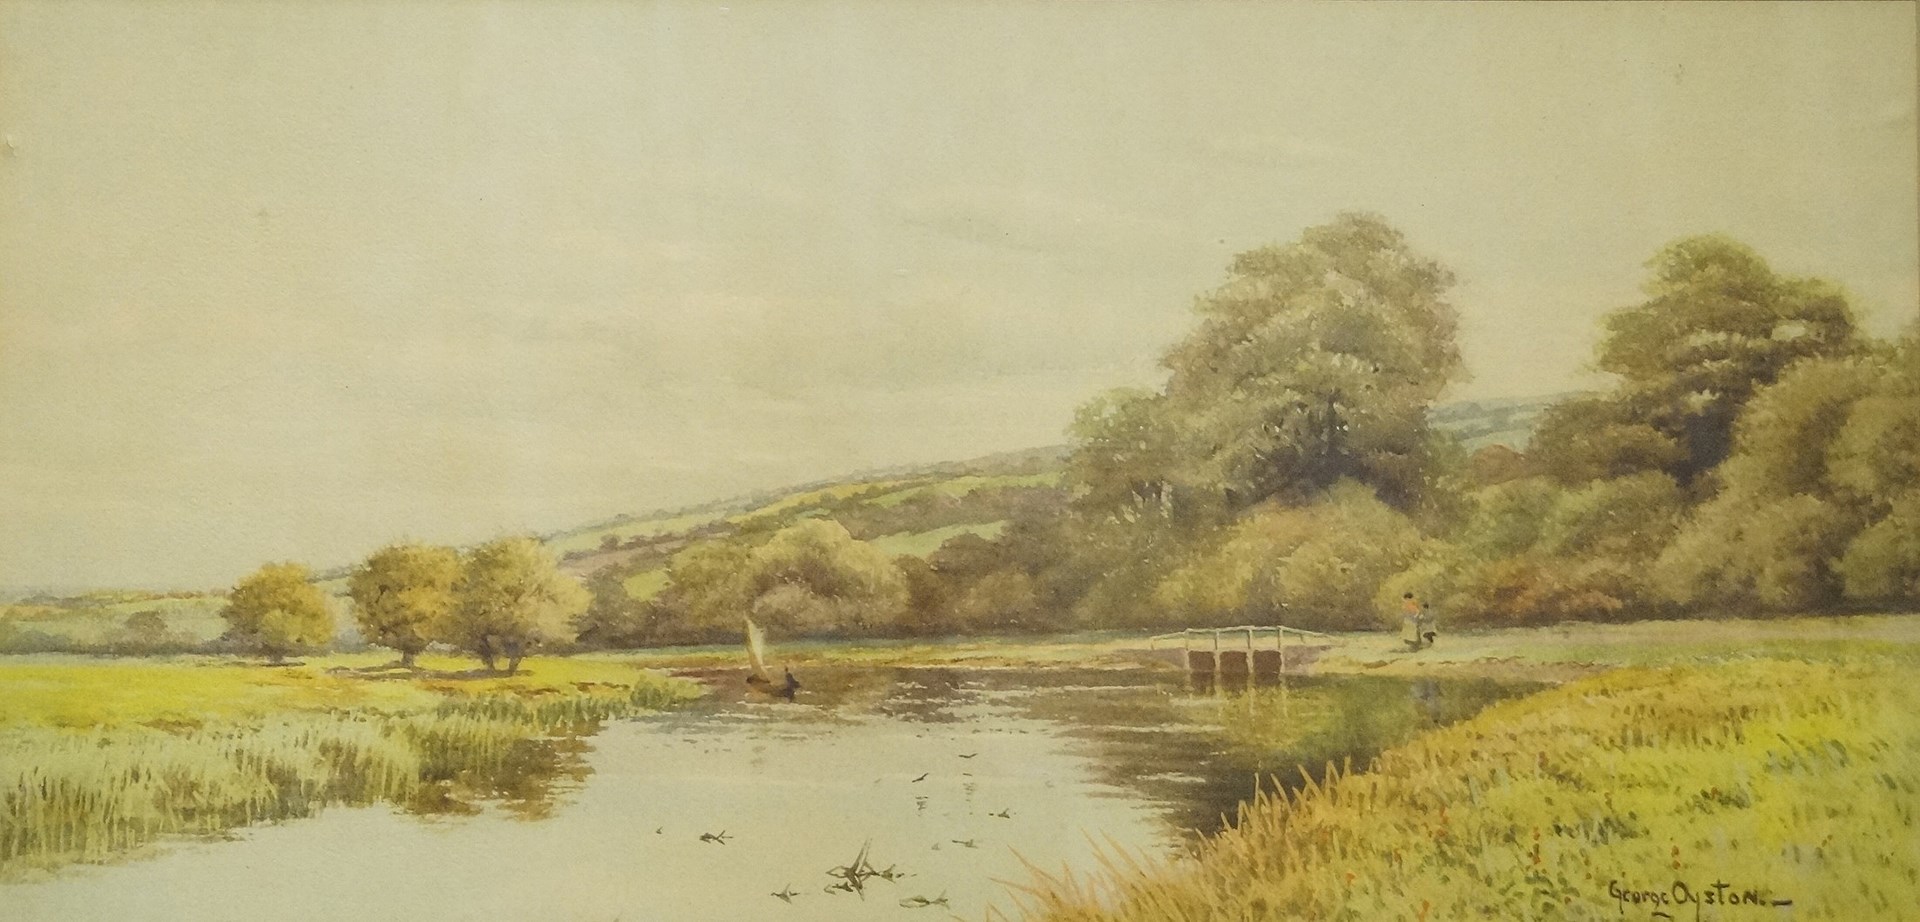 George Oyston (circa 1860 - 1937)
Figures on the river bank
Print
Signed lower right
27.5cm x 57.